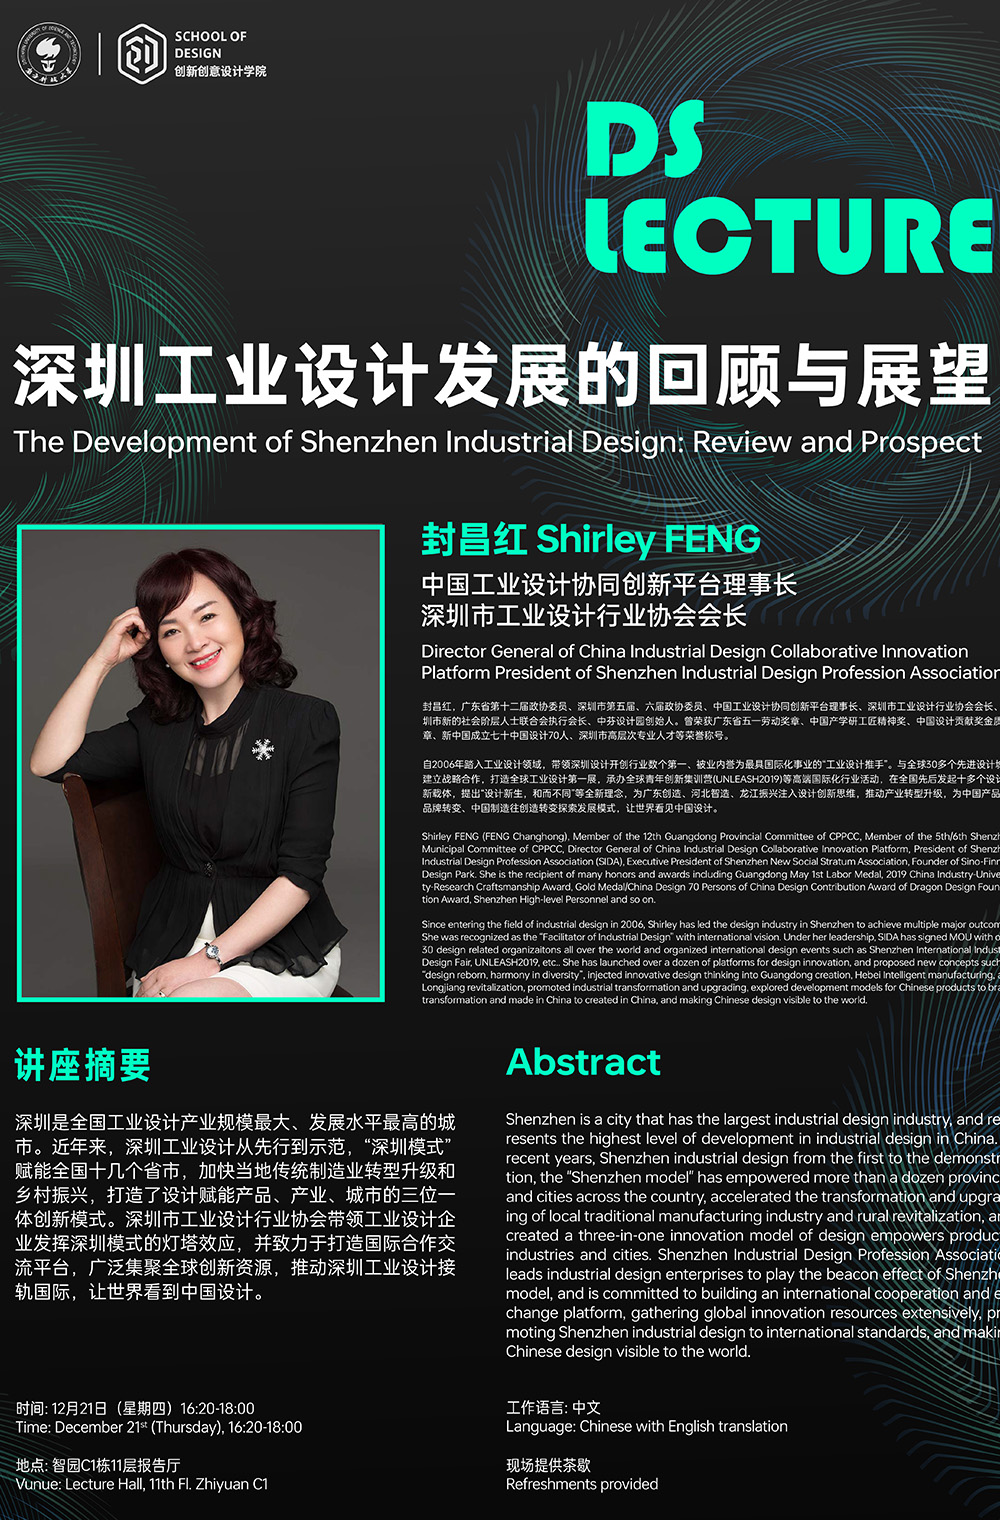 The Development of Shenzhen Industrial Design: Review and Prospect